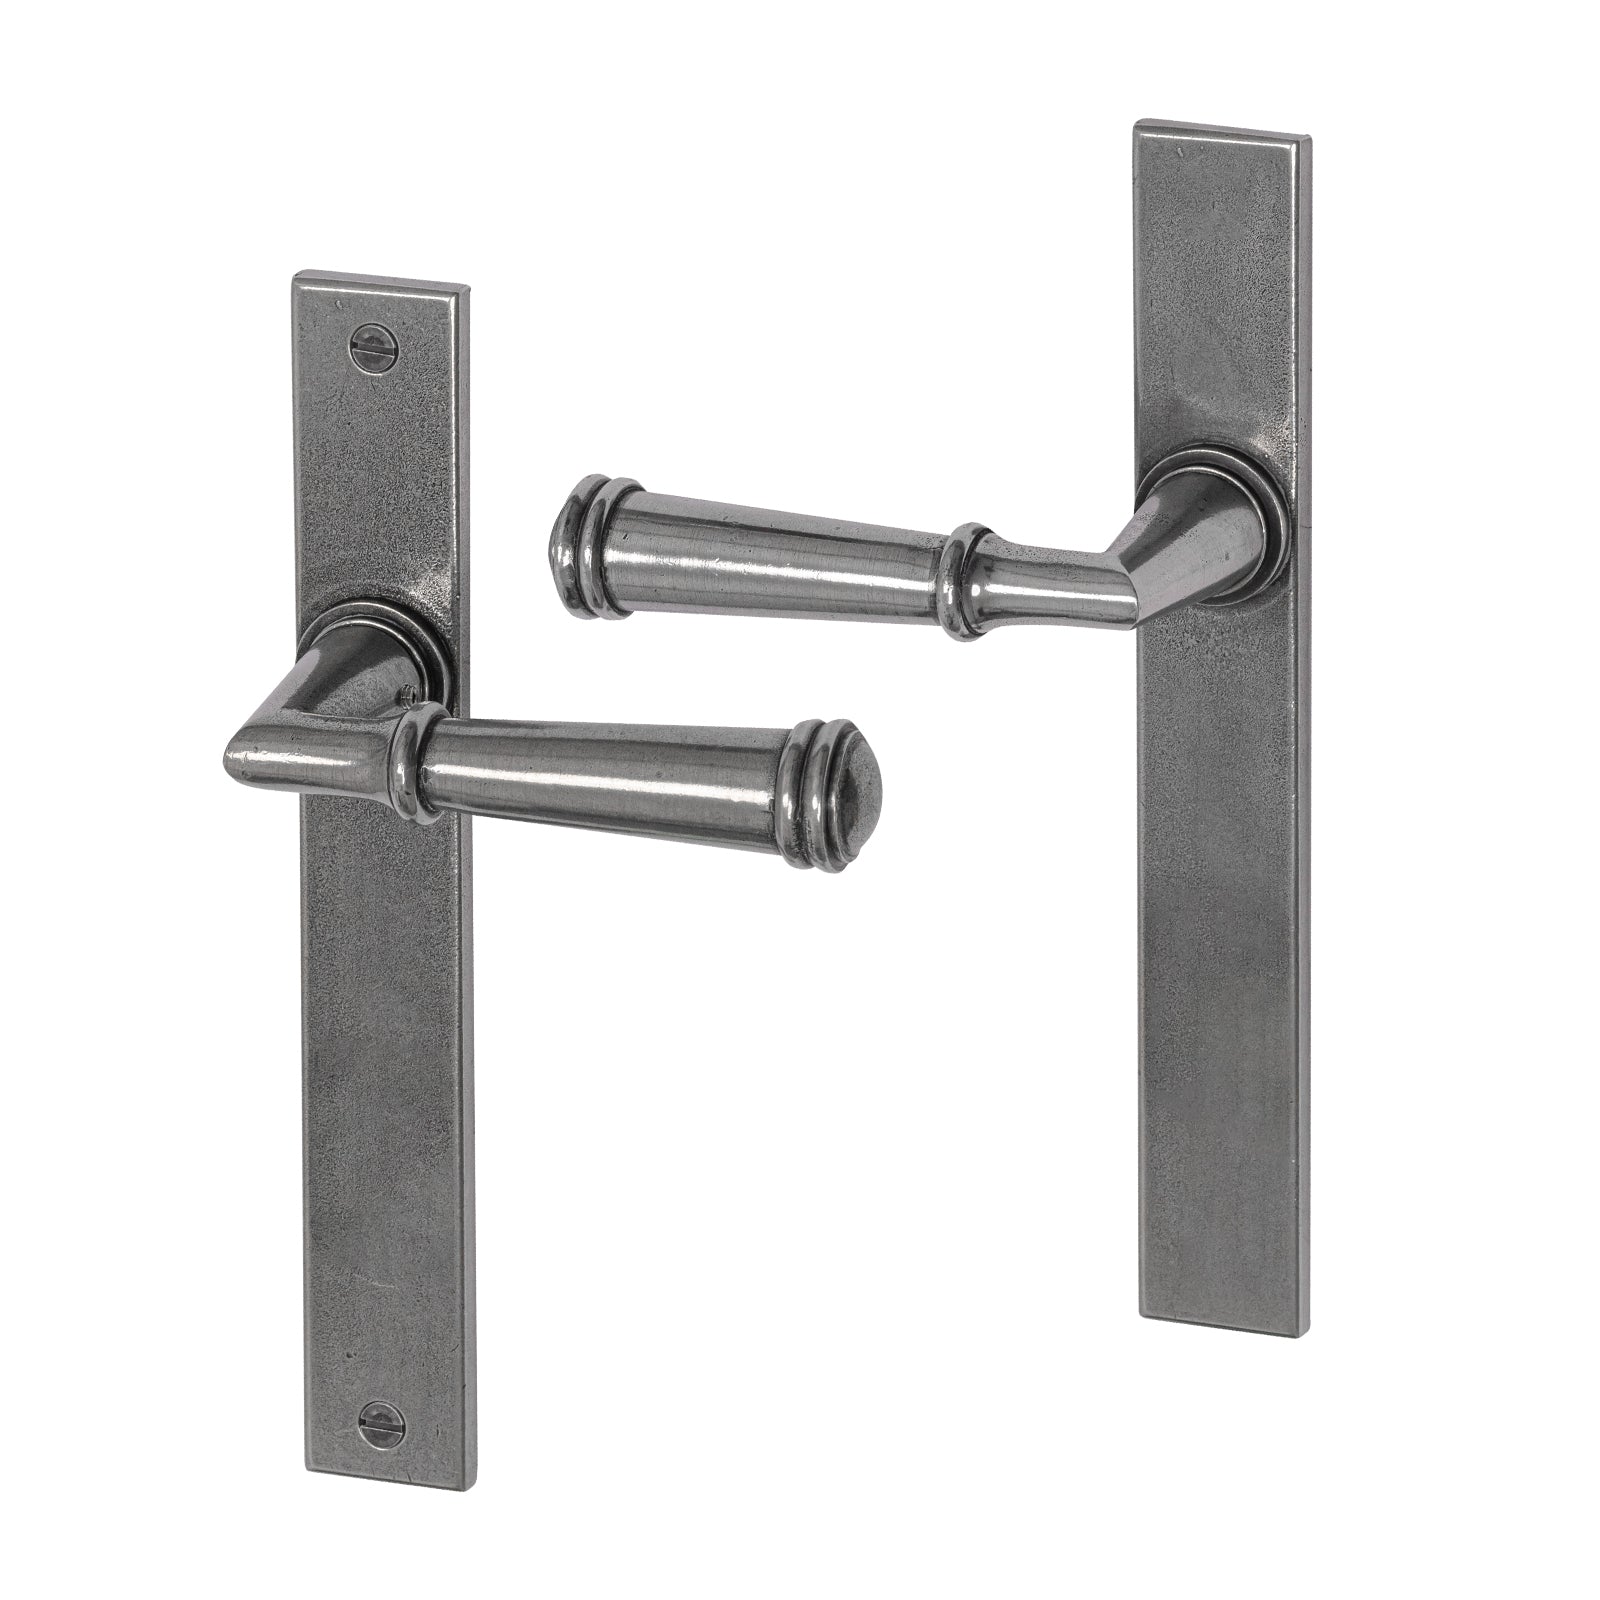 Multipoint handle Latch